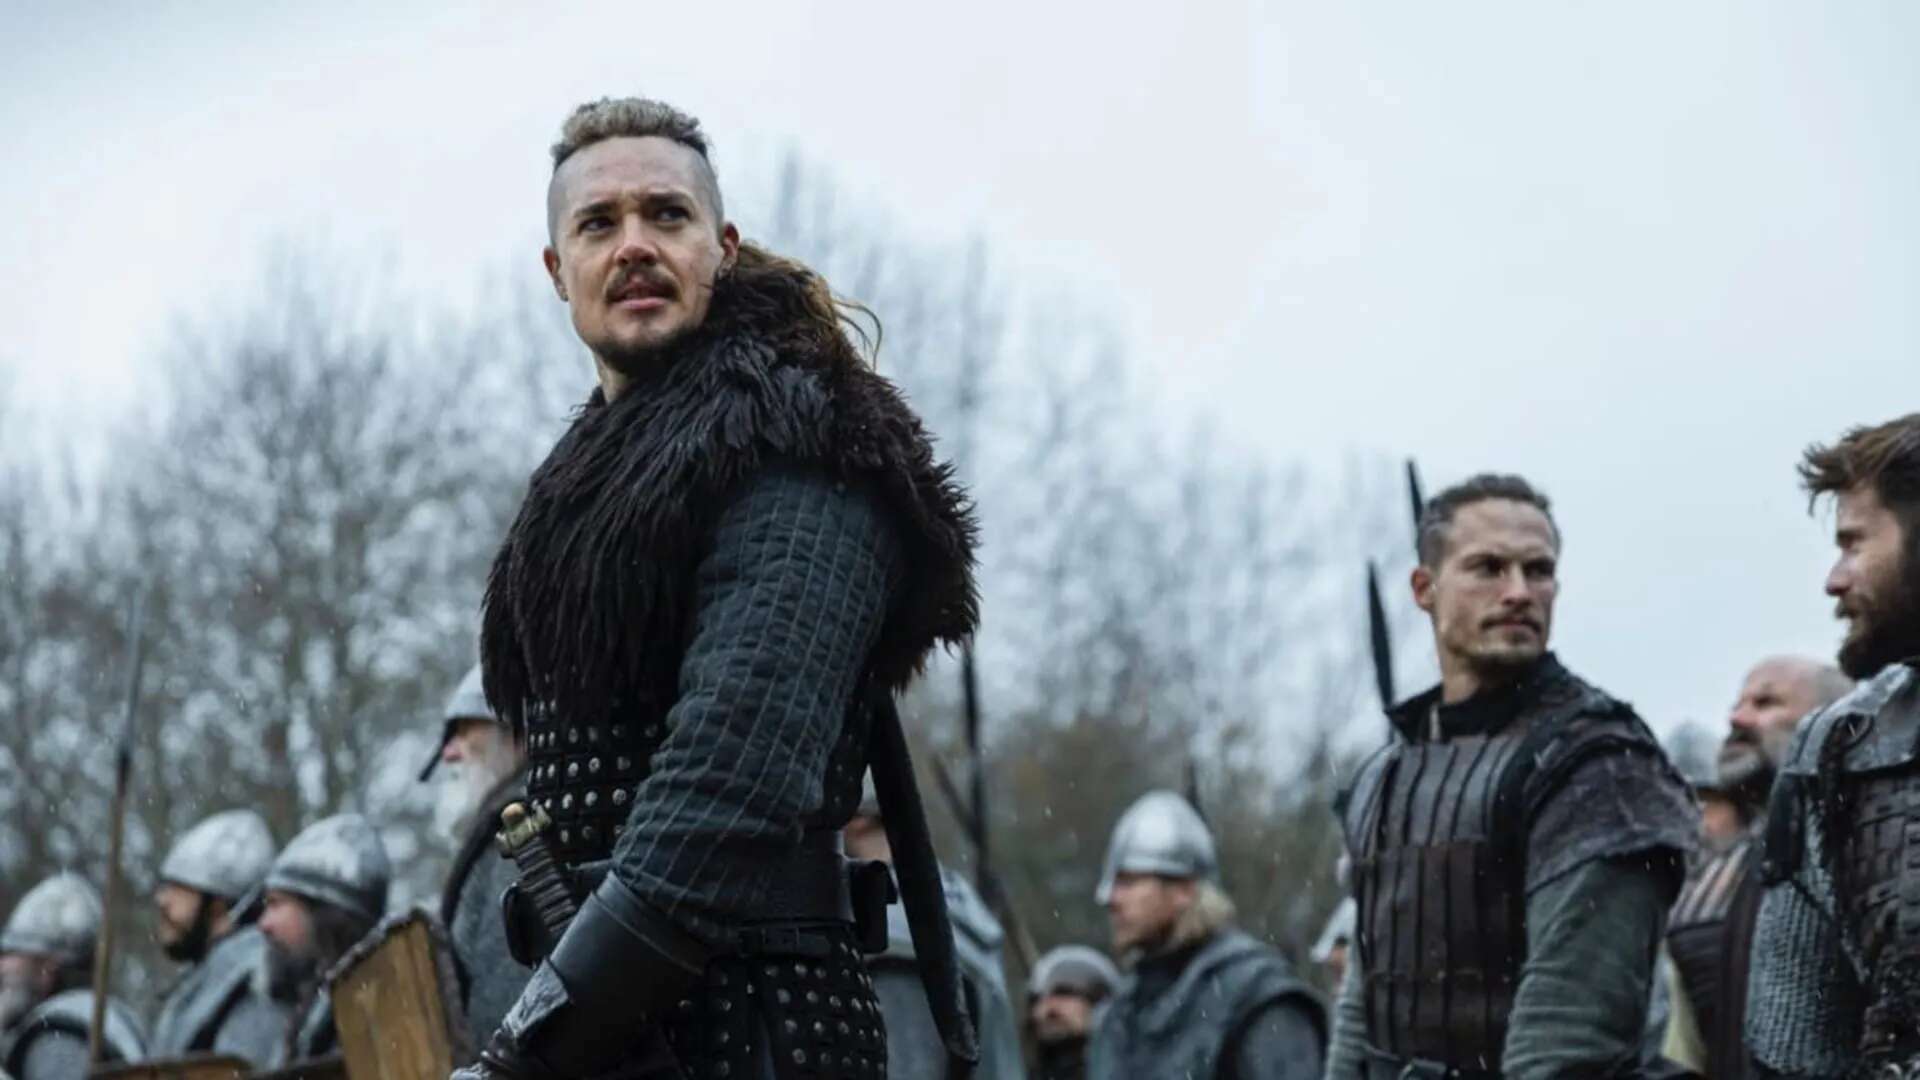 Will The Last Kingdom Have A Movie?